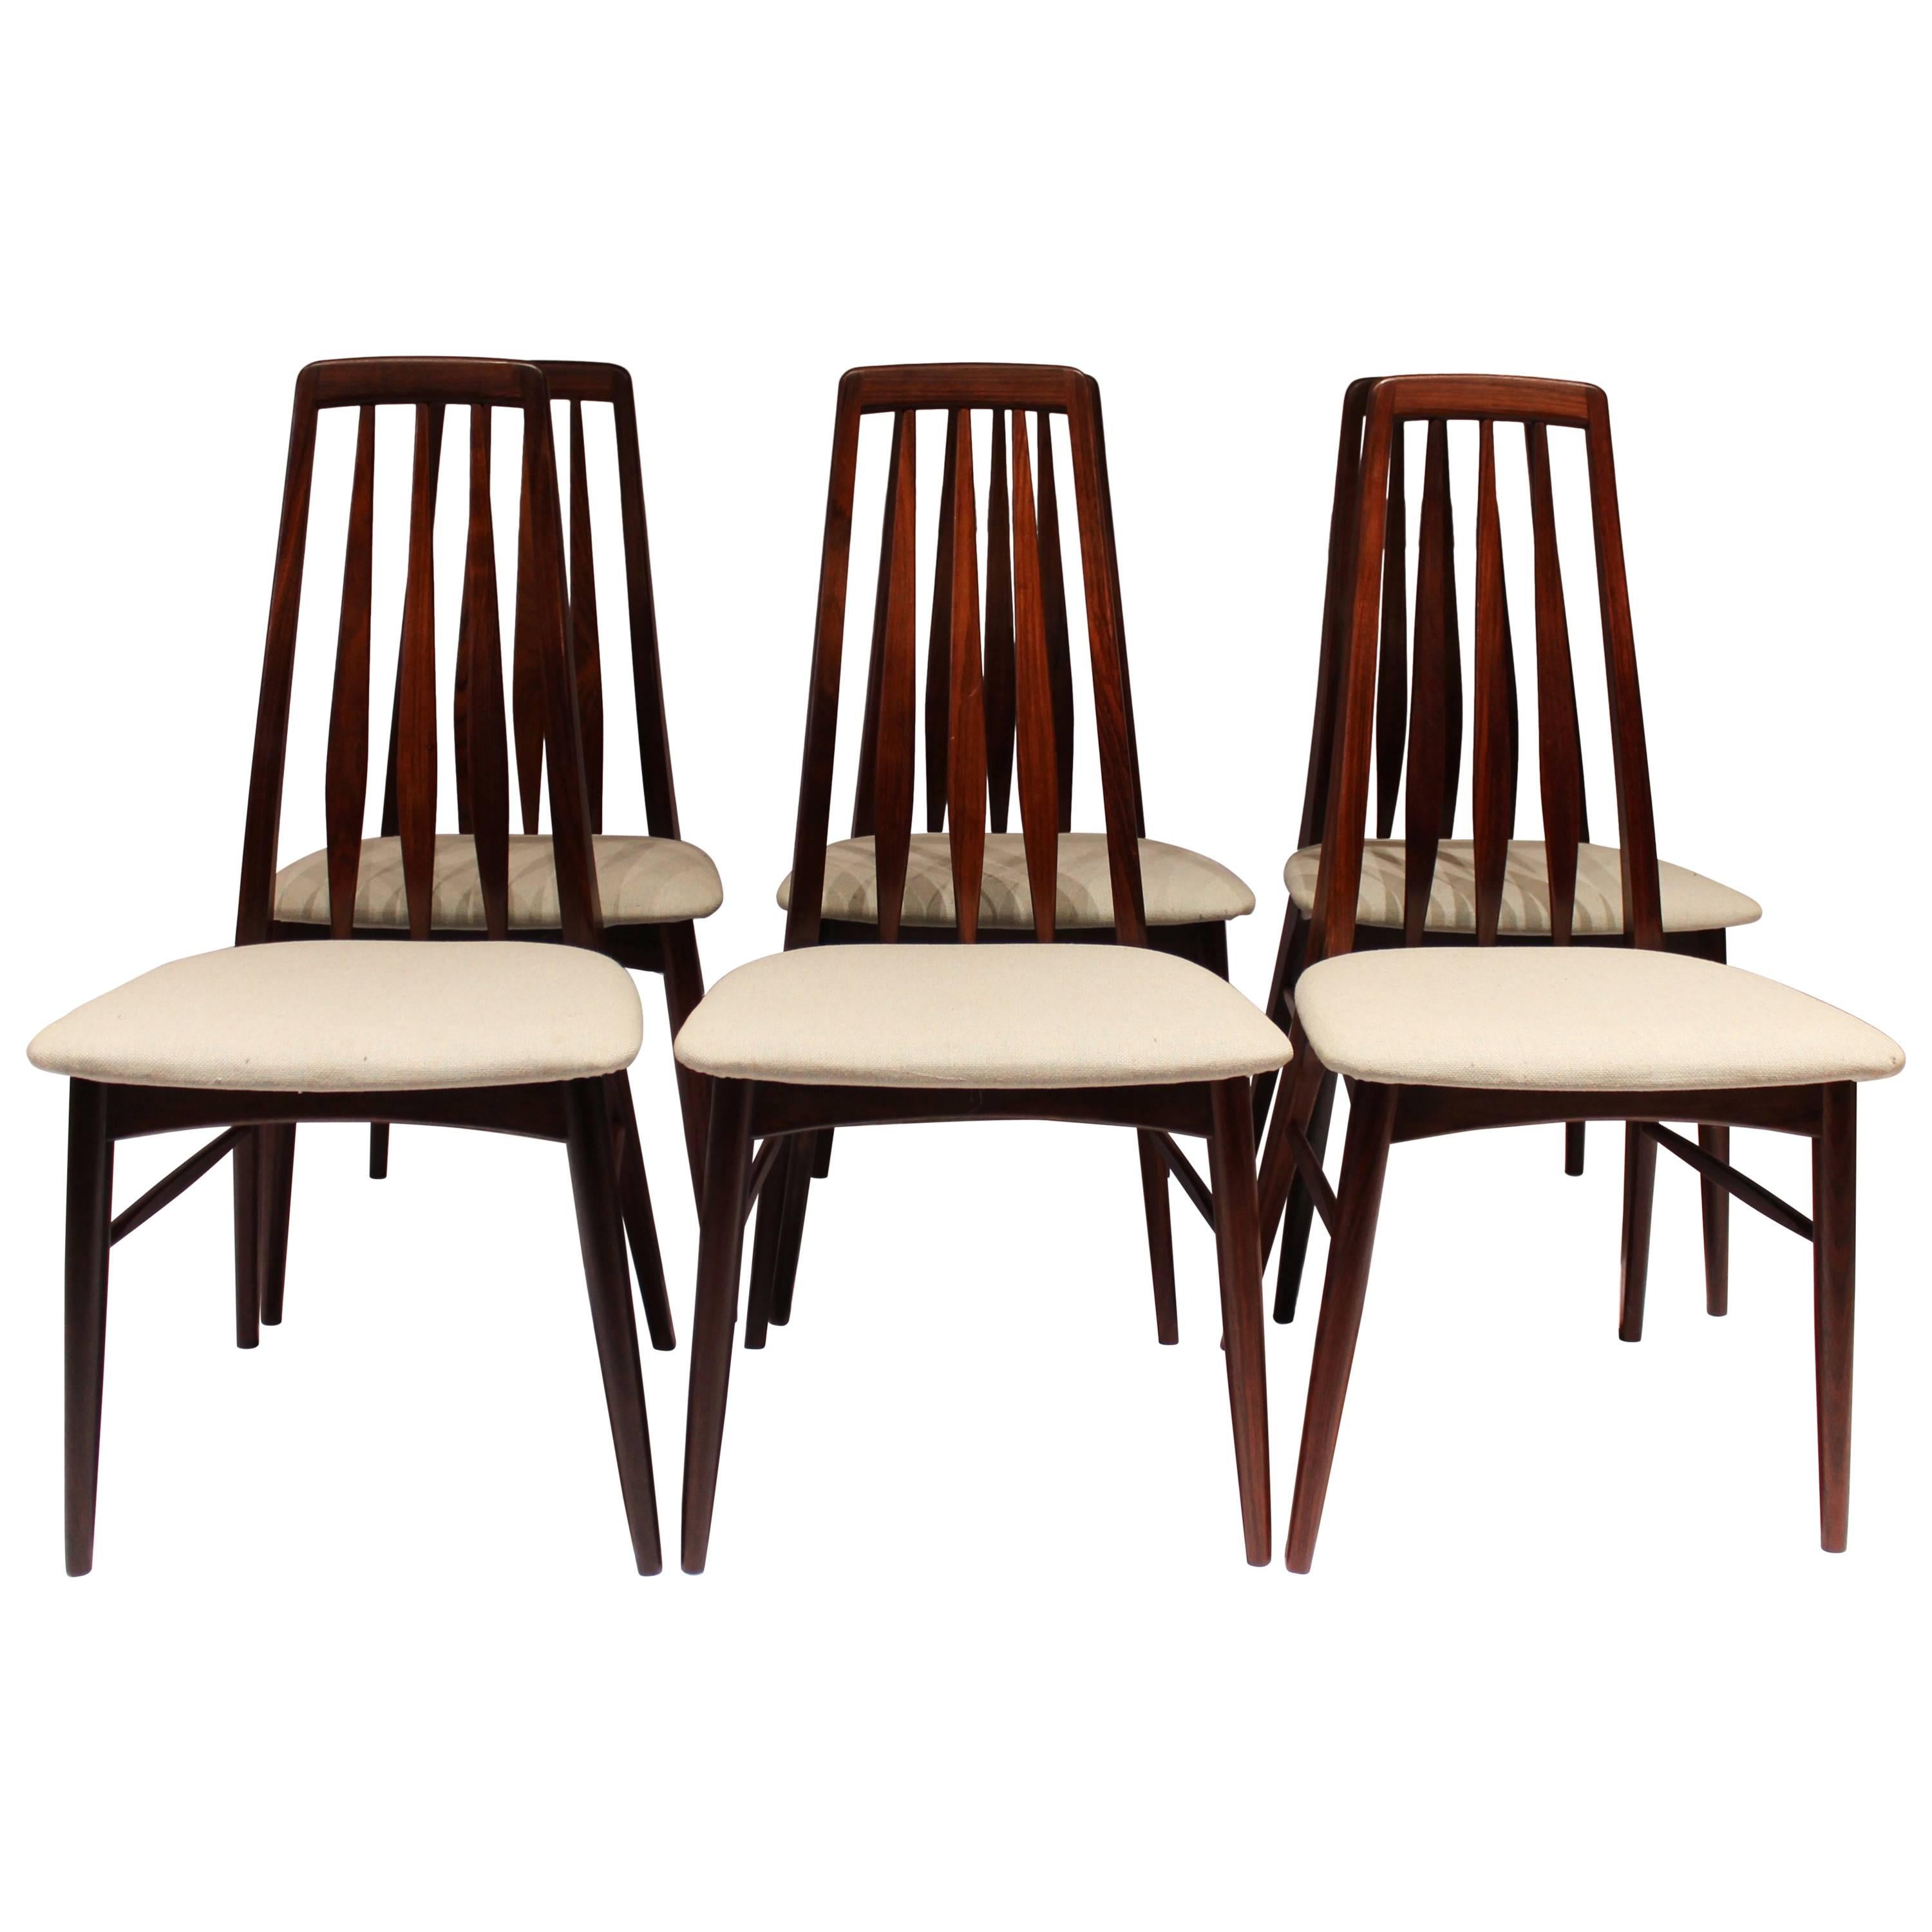 Set of Six "Eva" Dining Room Chairs Designed by Niels Koefoed, 1960s